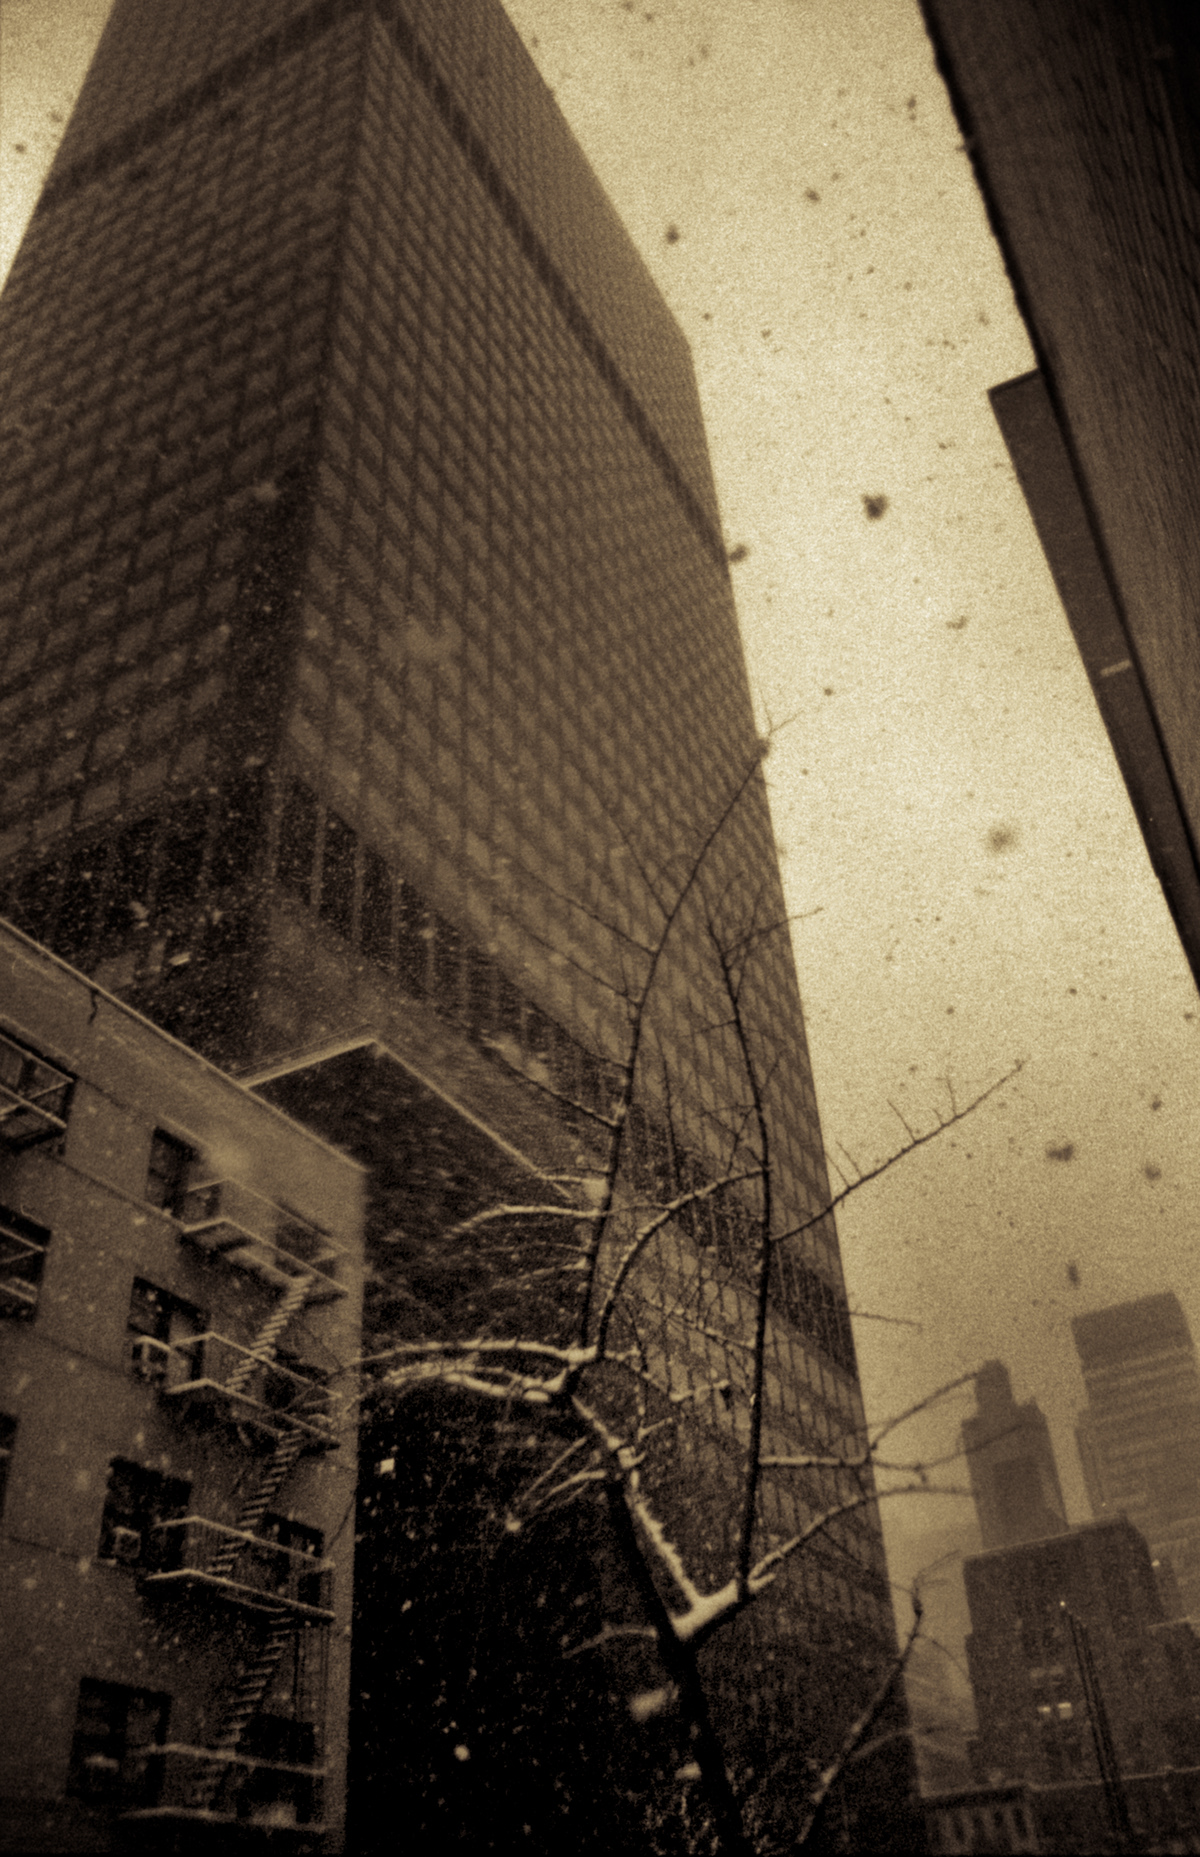 Snowstorm in New York City.